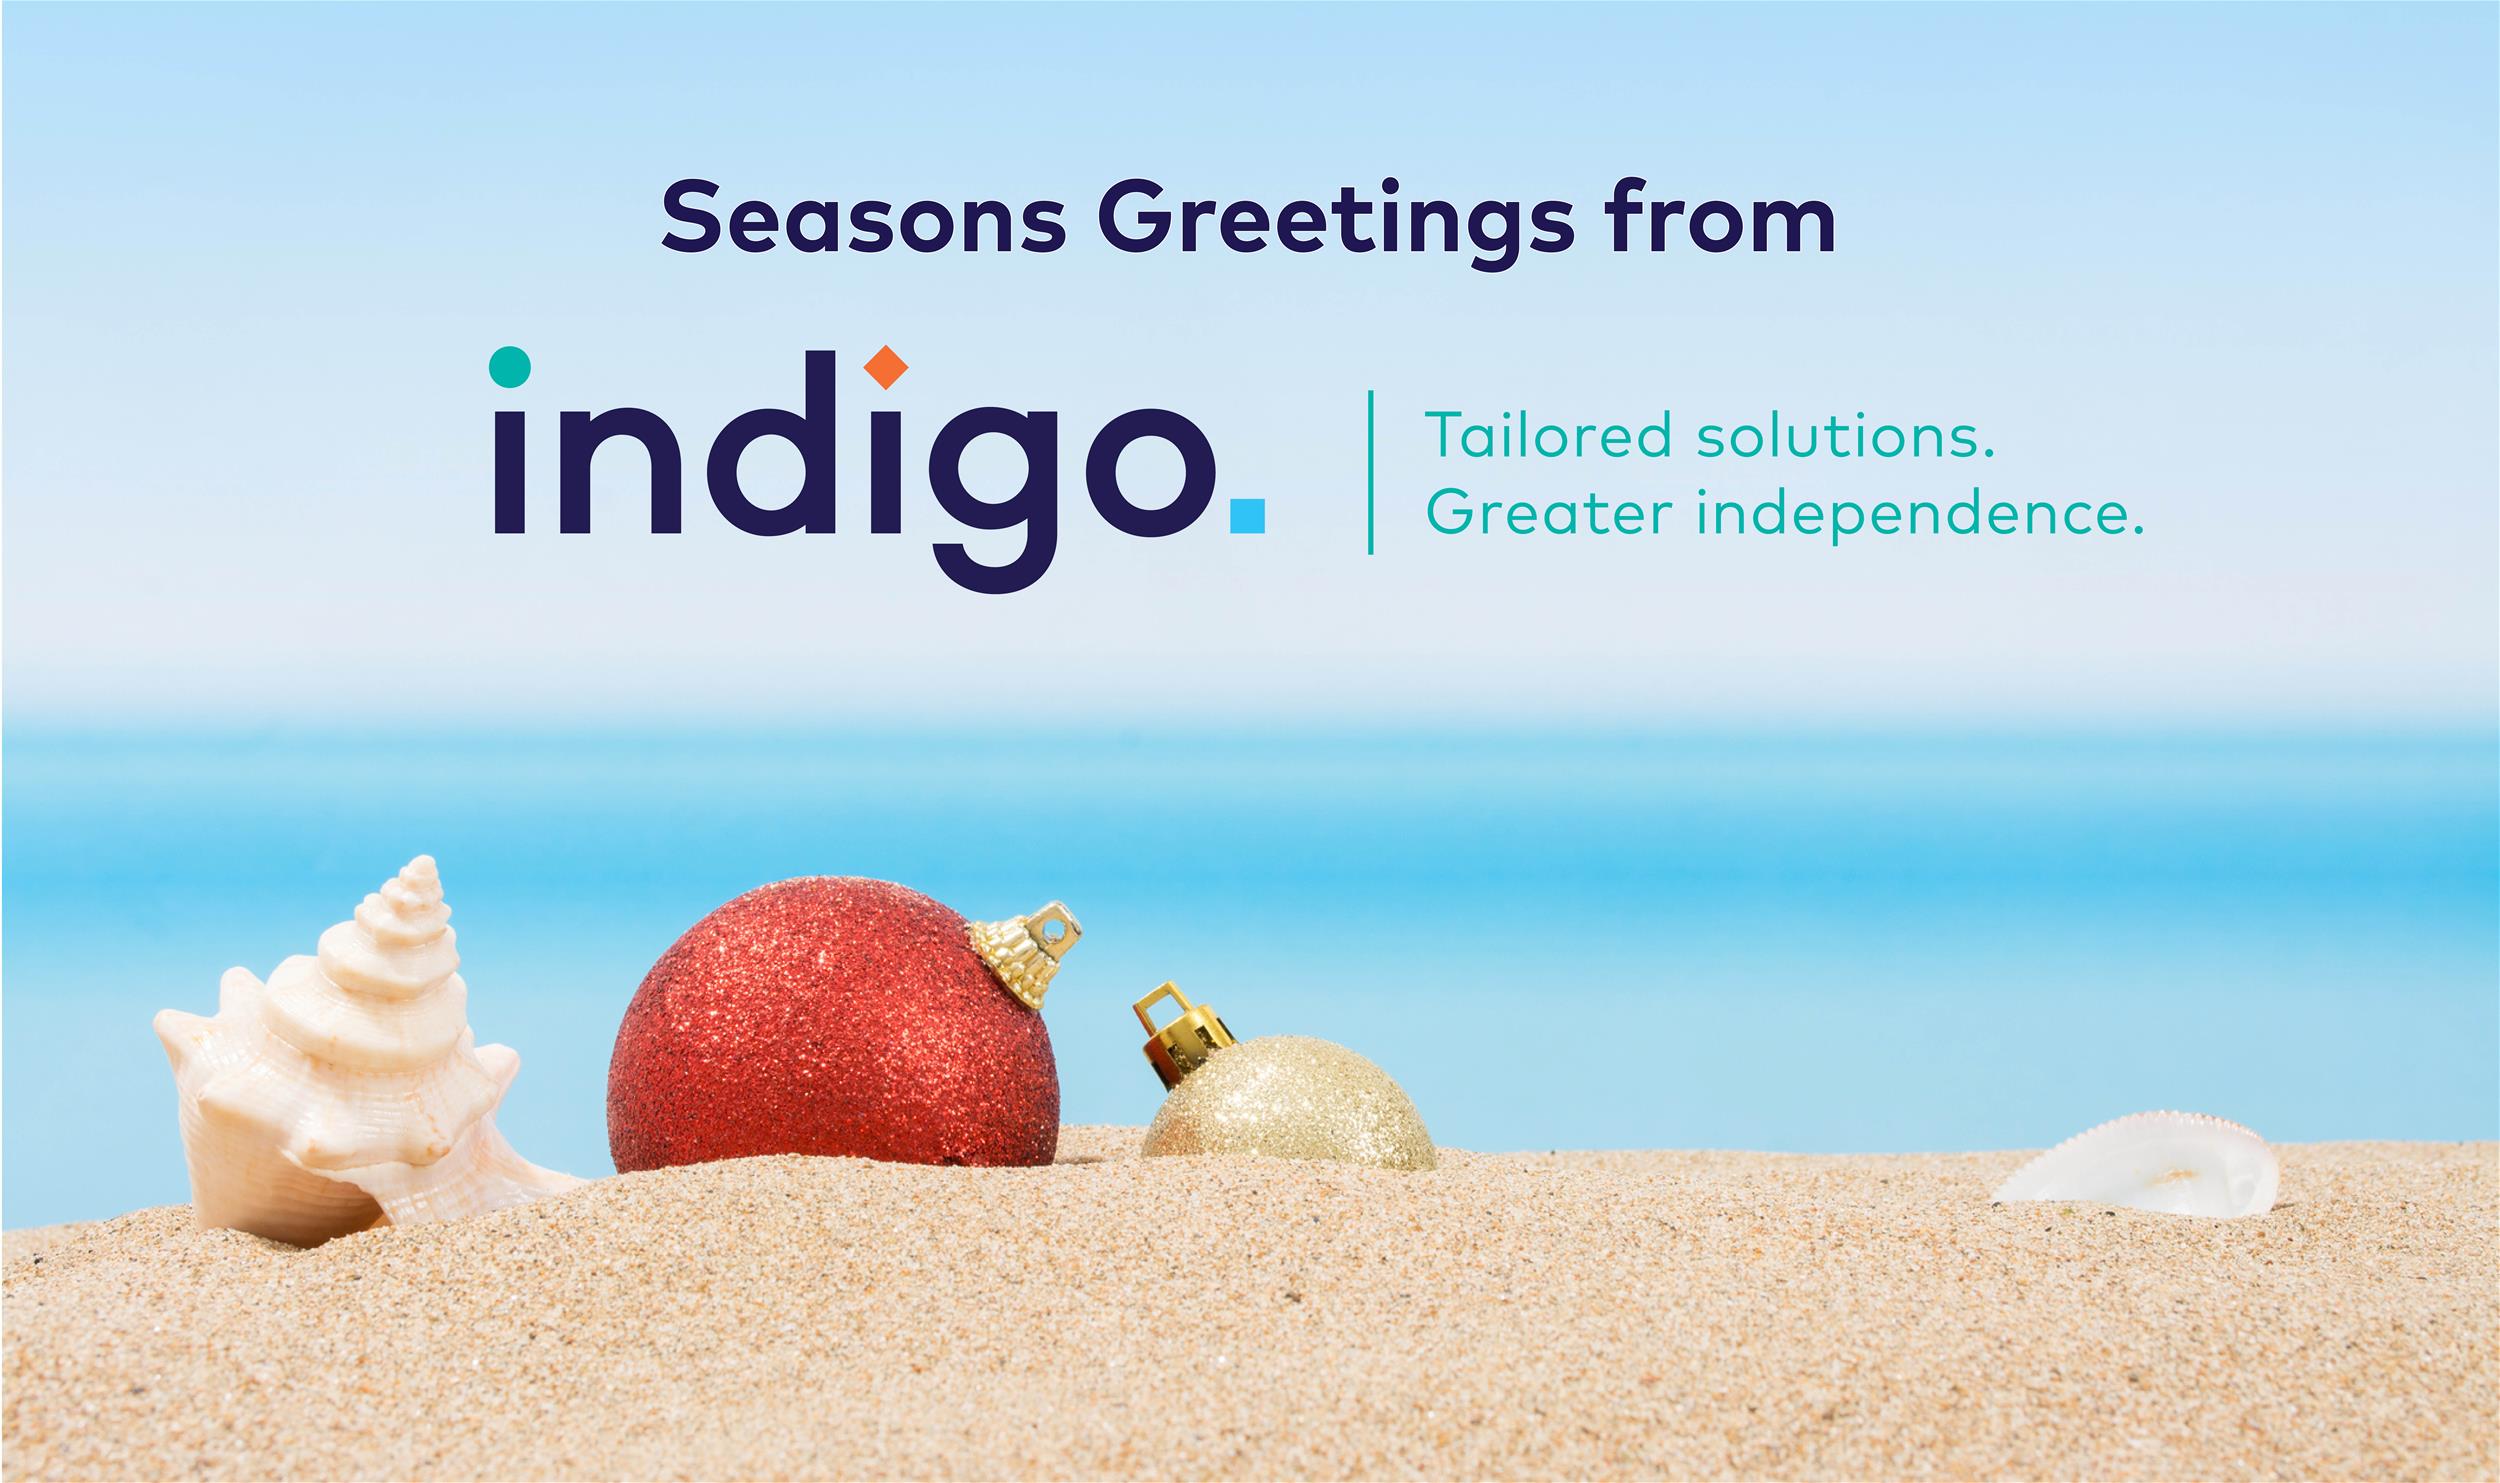 Indigo logo & text on a beach background with sand, shells and a bauble